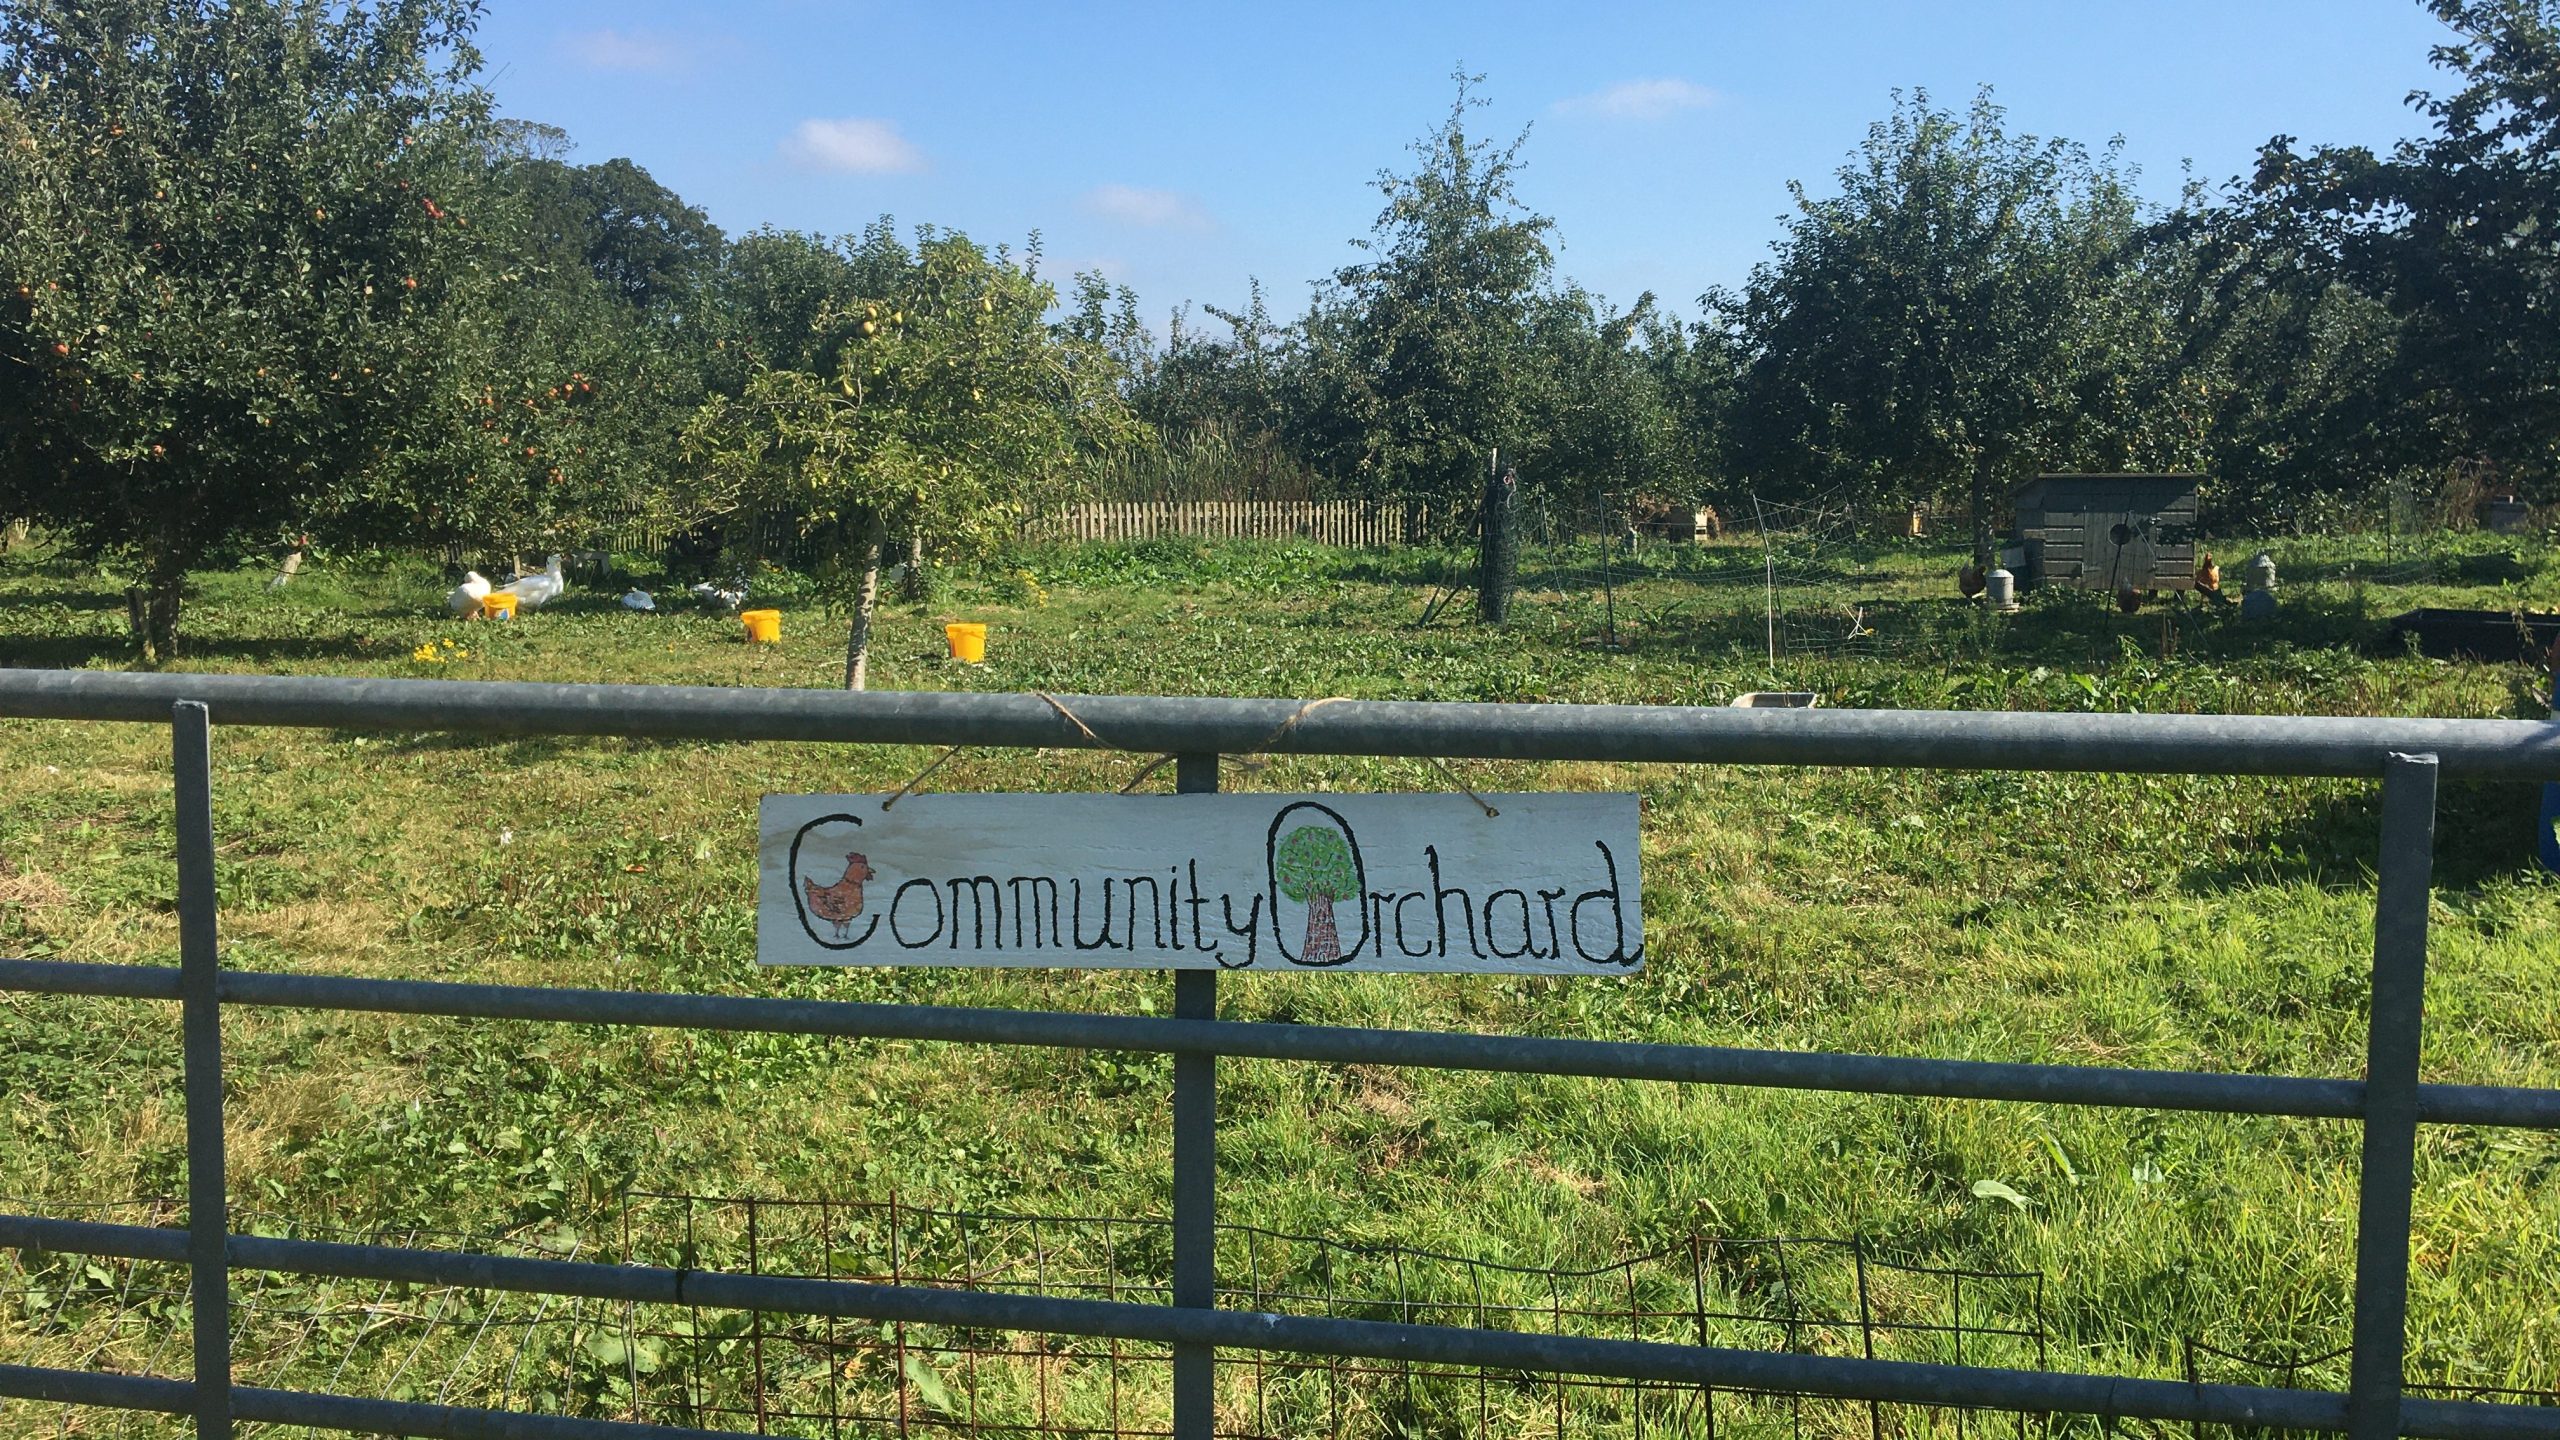 Beyond a gate with a handmade sign reading 'community orchard' some of the heritage apple and pear trees can be seen. A few yellow buckets can just be seen at the foot of the trees- it must be time to pick the fruit! 